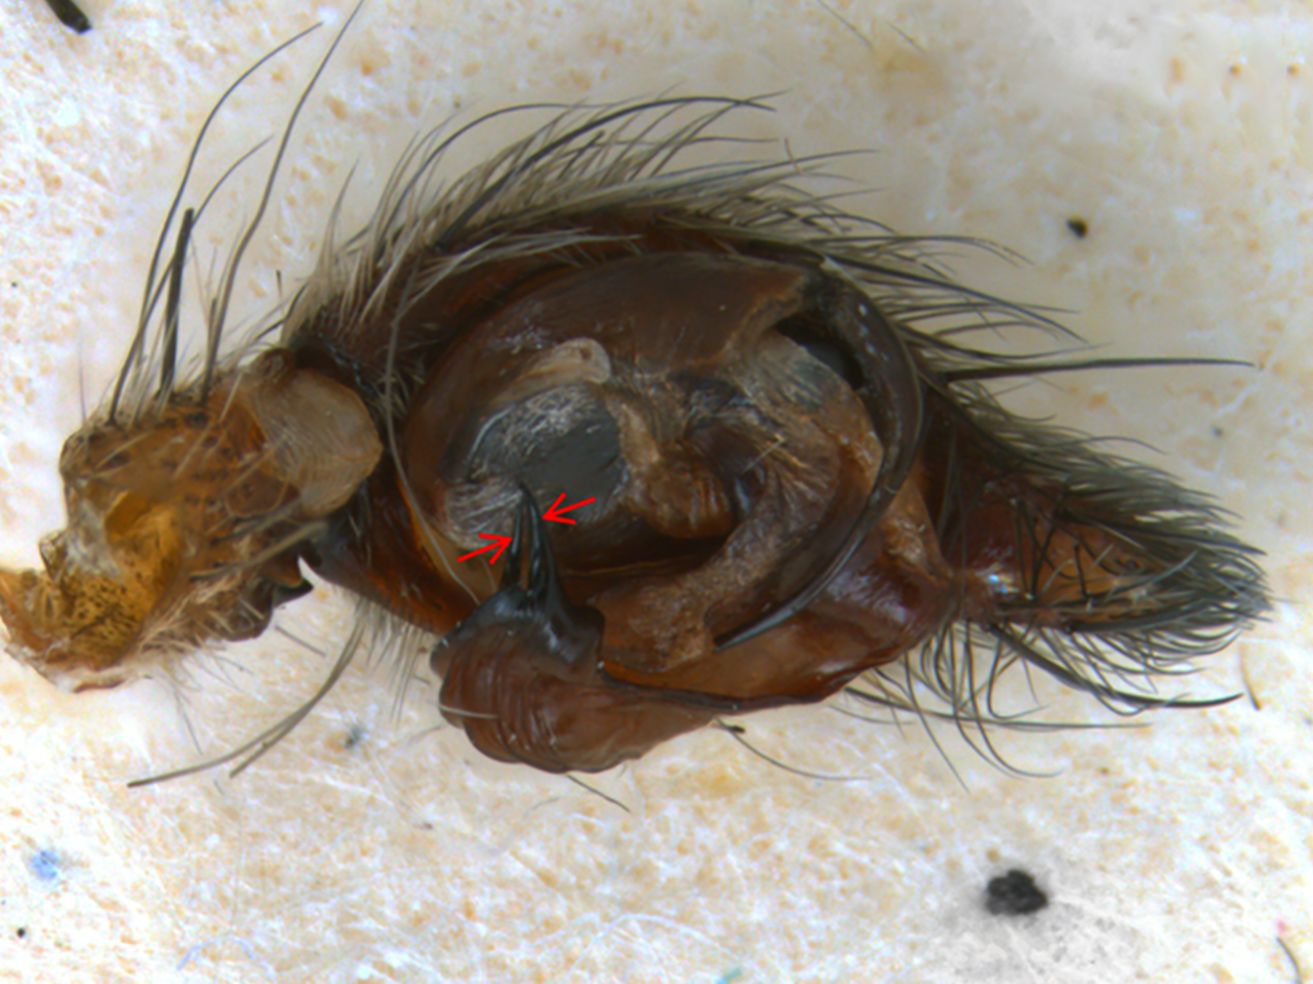 Fig. 6. Male Hobo Pedipalp With Arrows Indicating Two Prongs